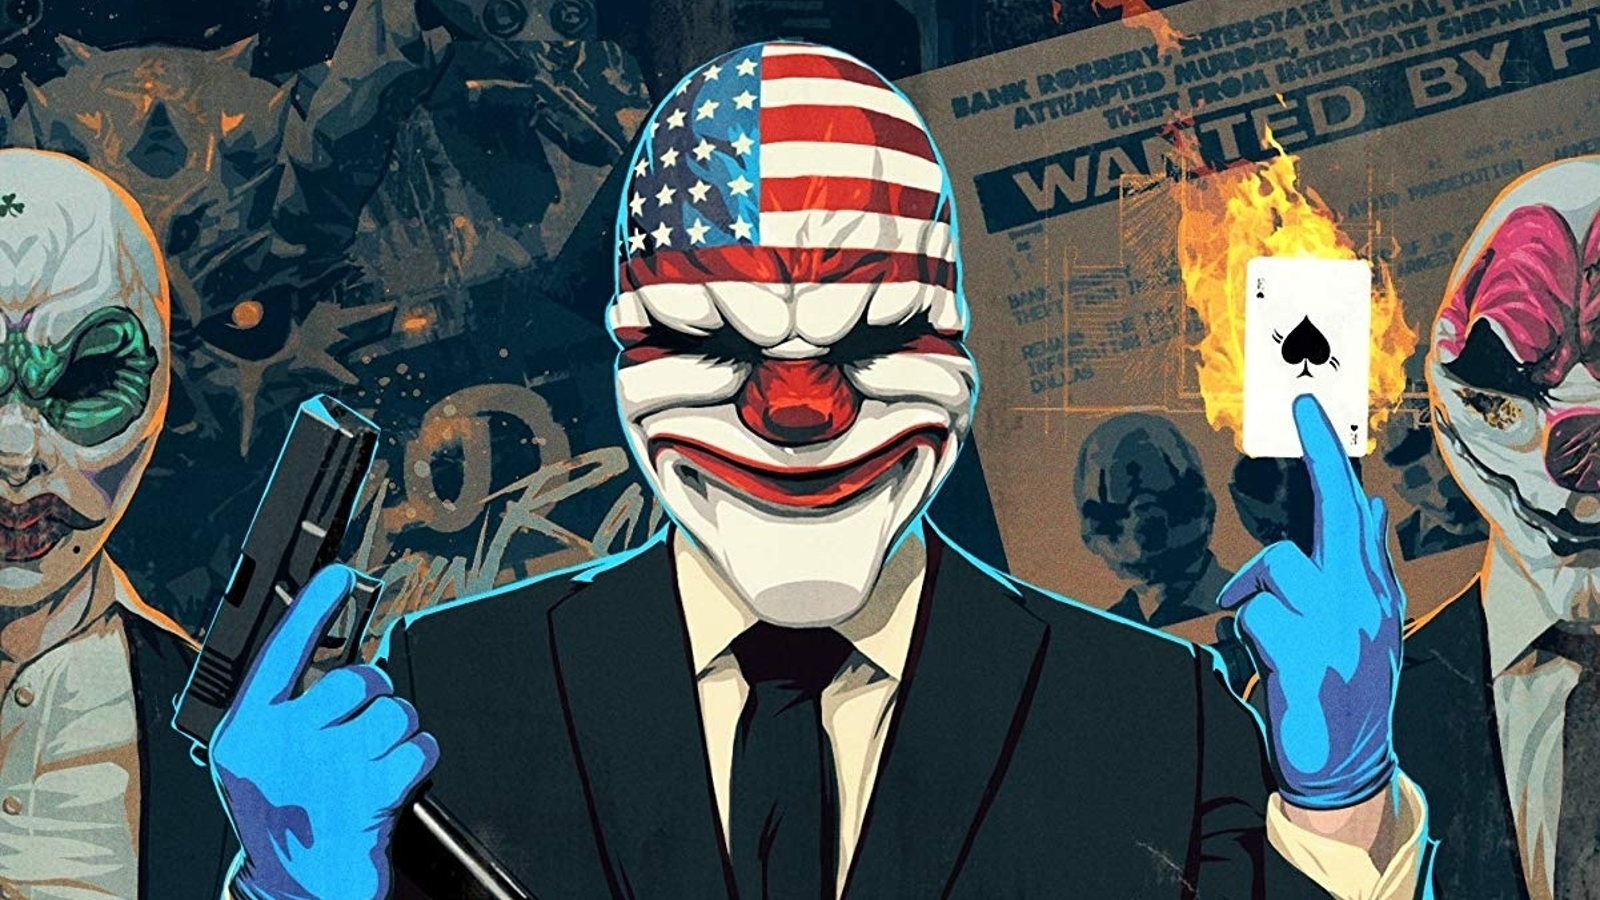 Payday 3 coming by 2023, Starbreeze says - Polygon